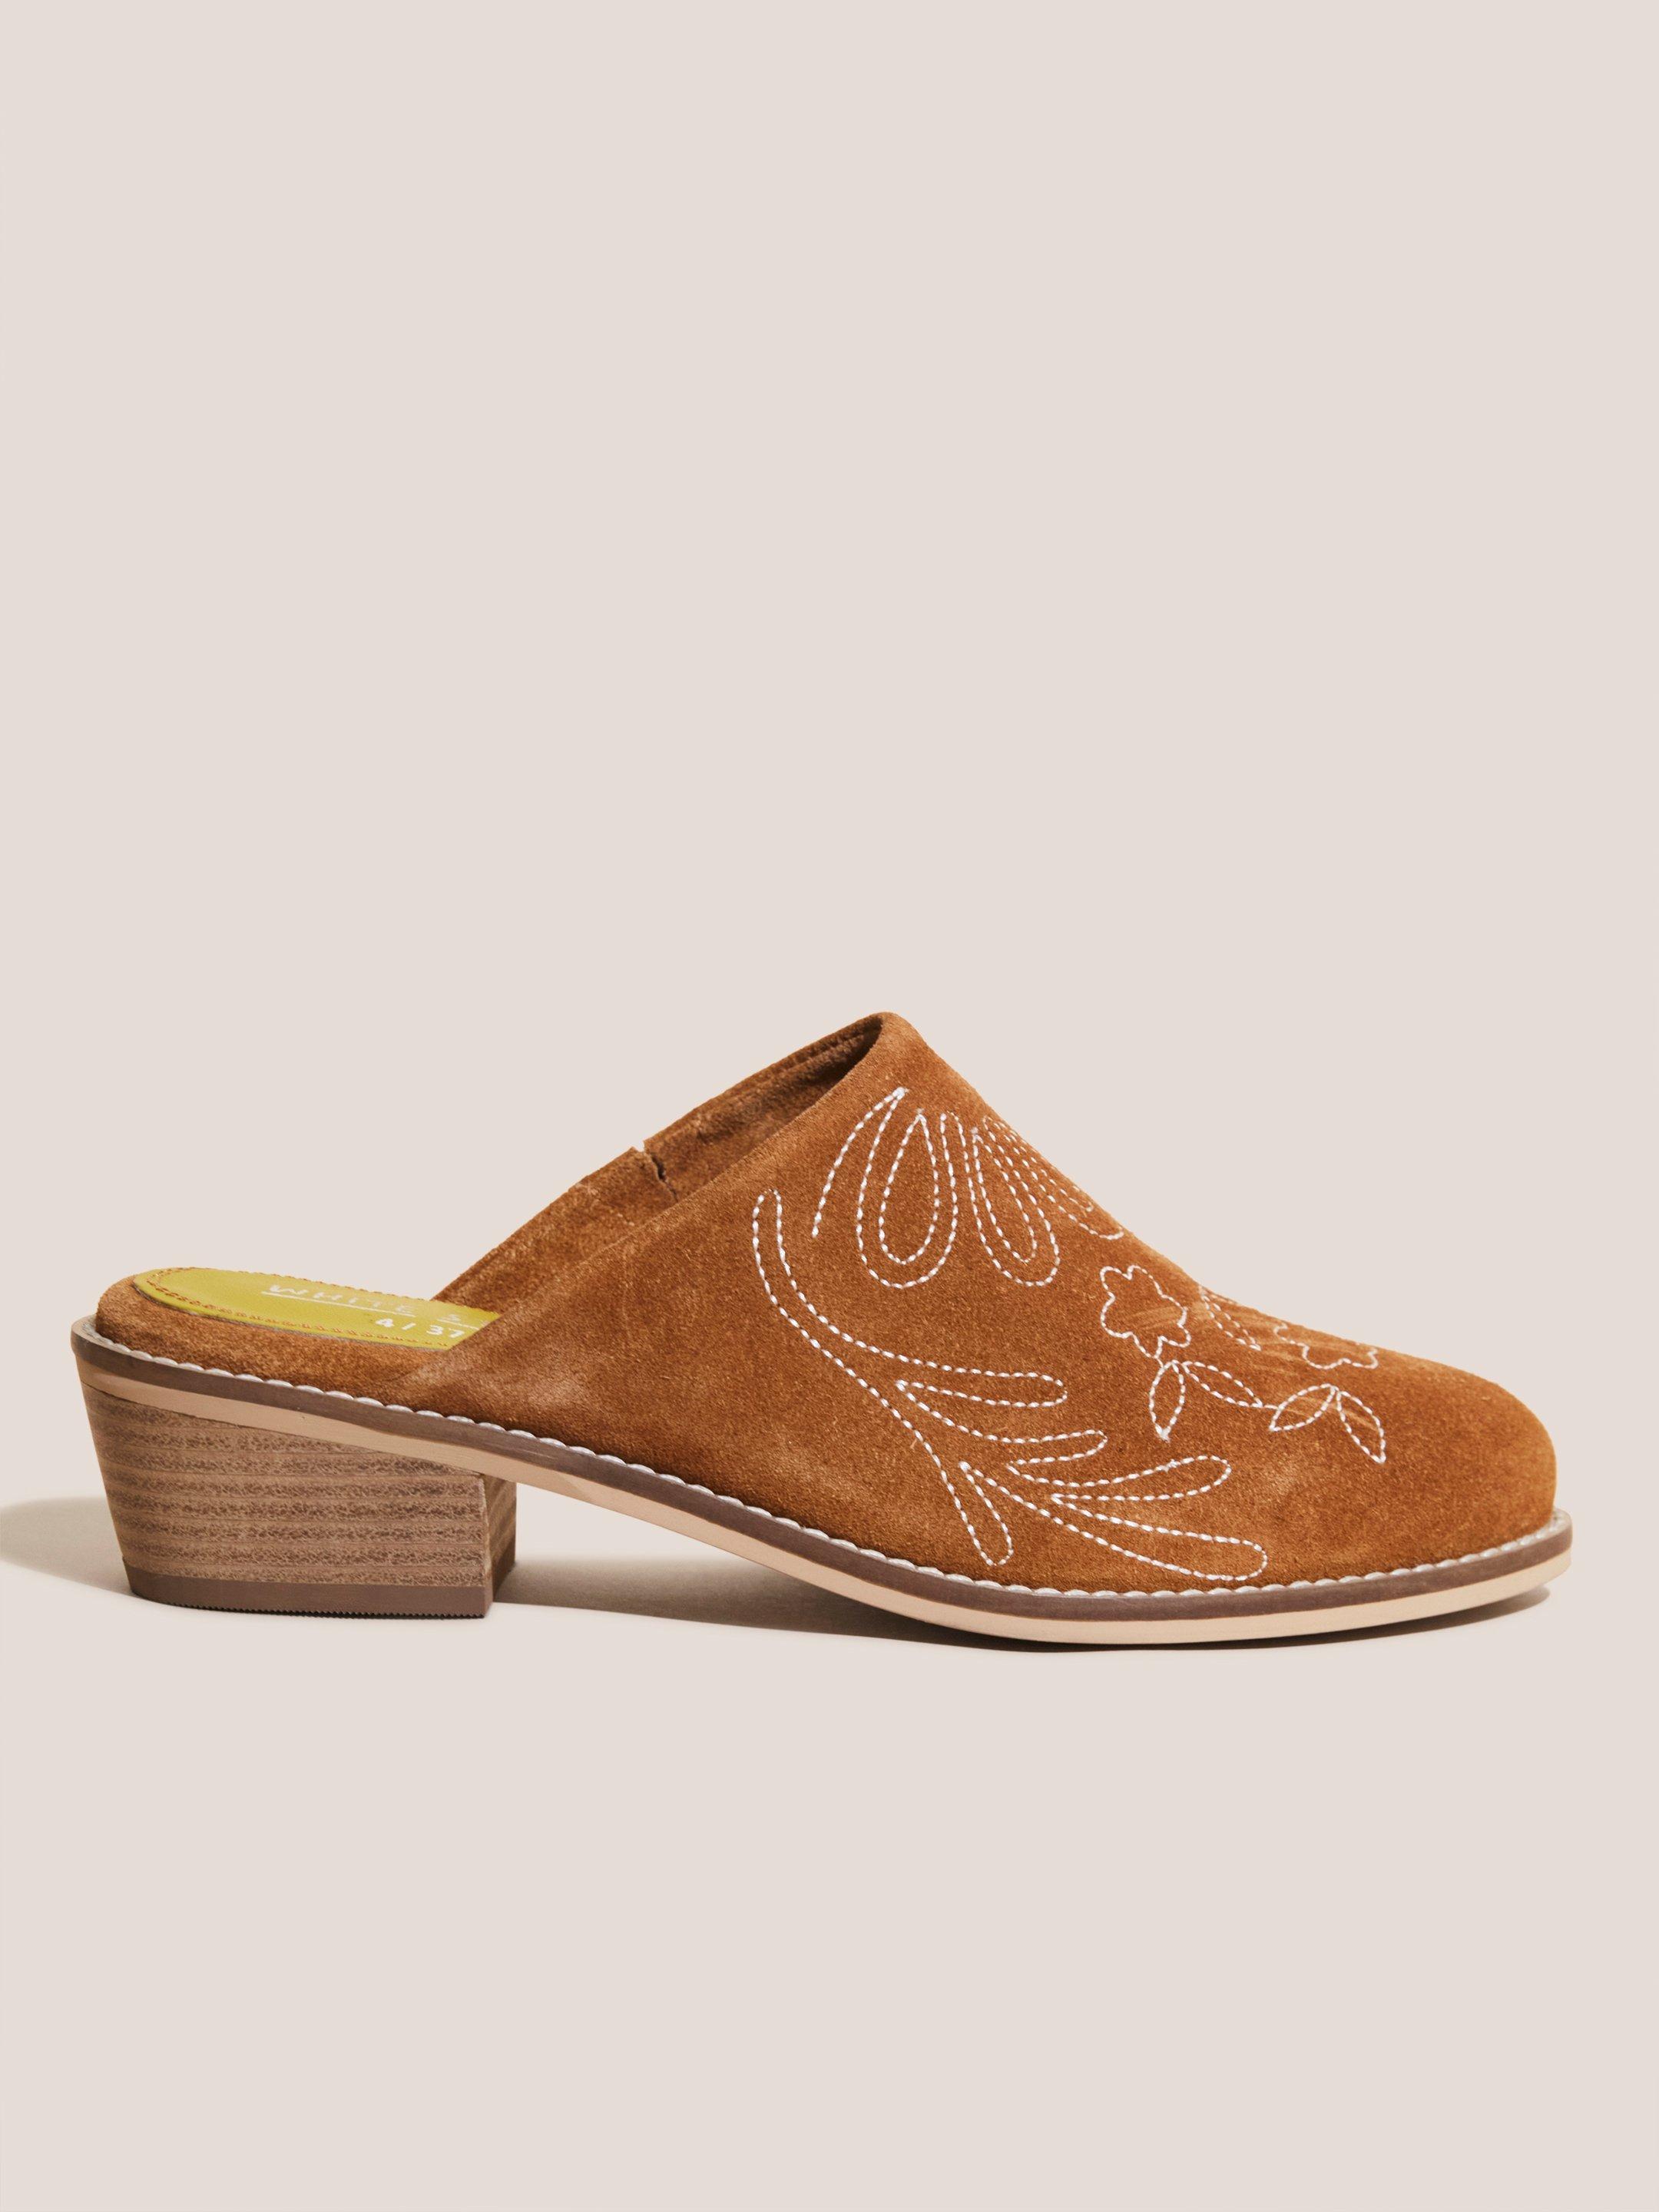 Suede Embroidered Mule